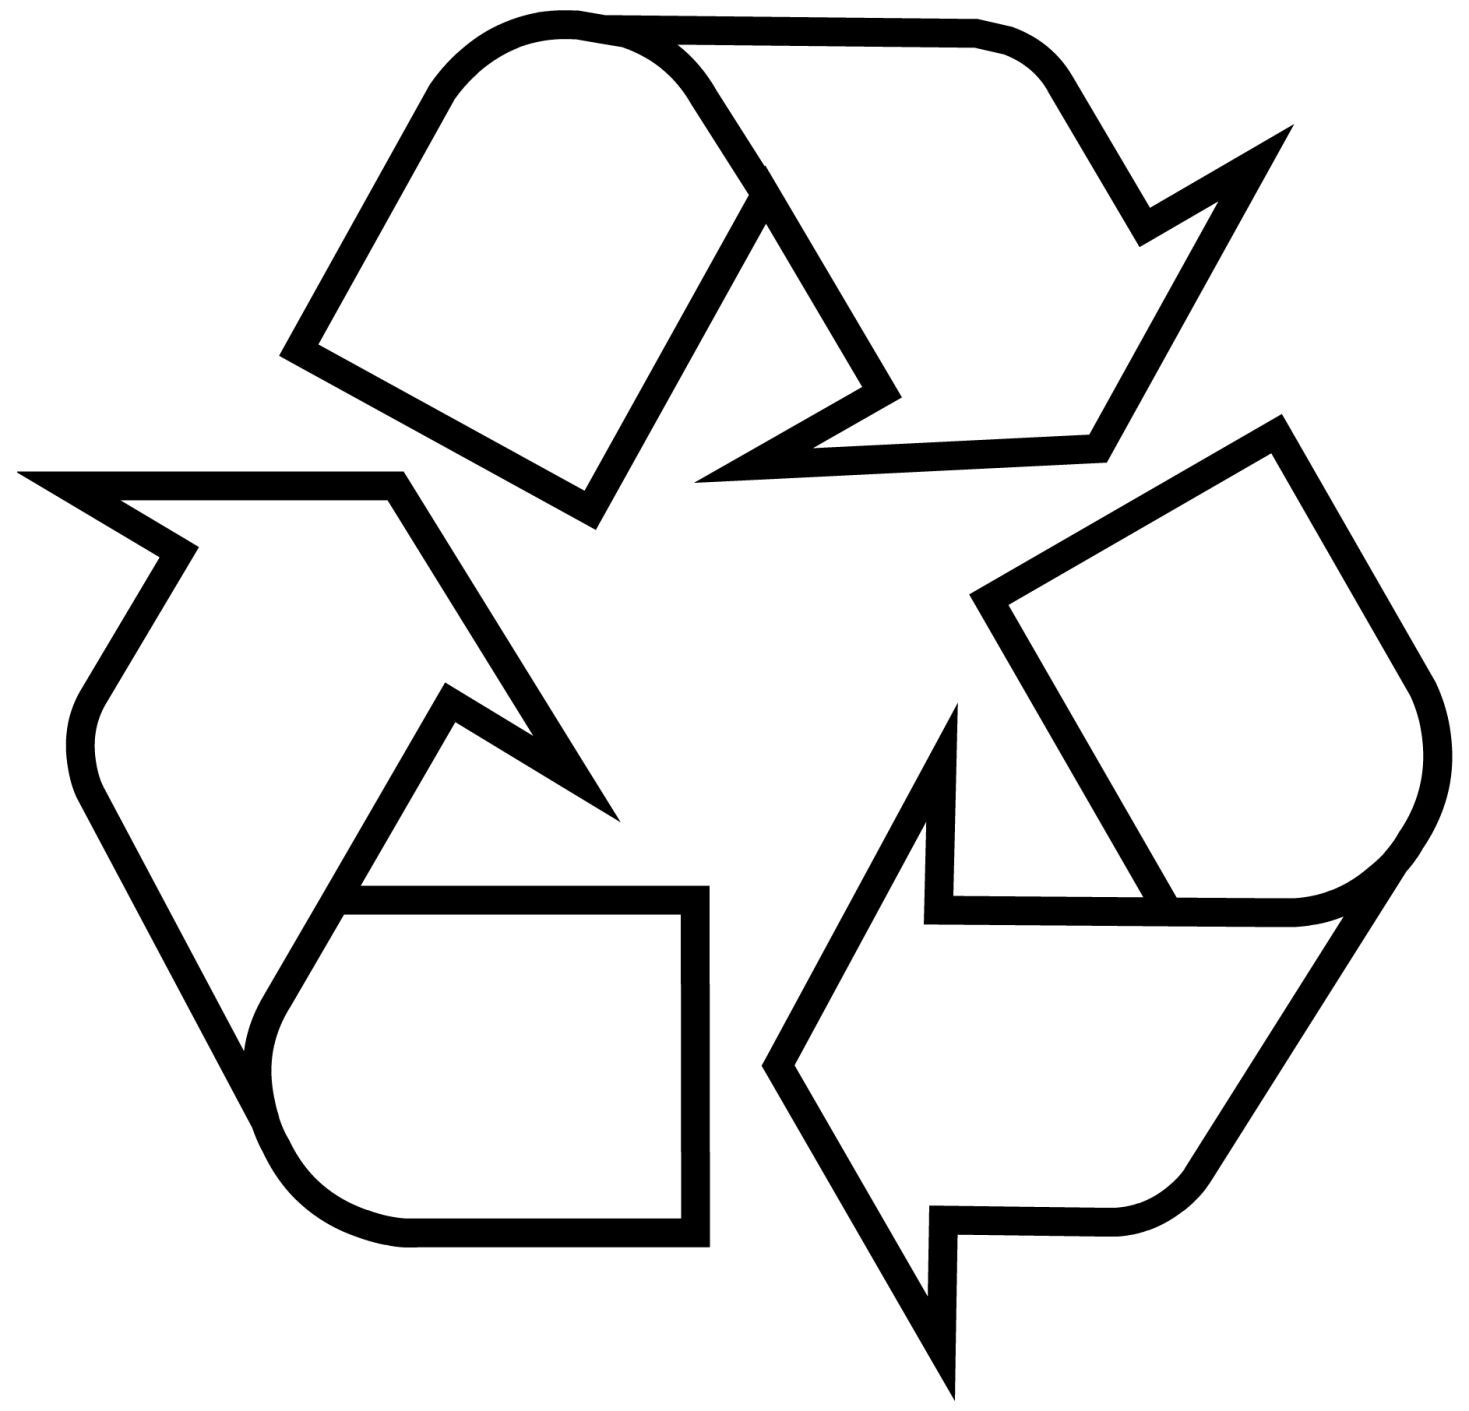 Recycle Symbol Free Vector and graphic 189755701.